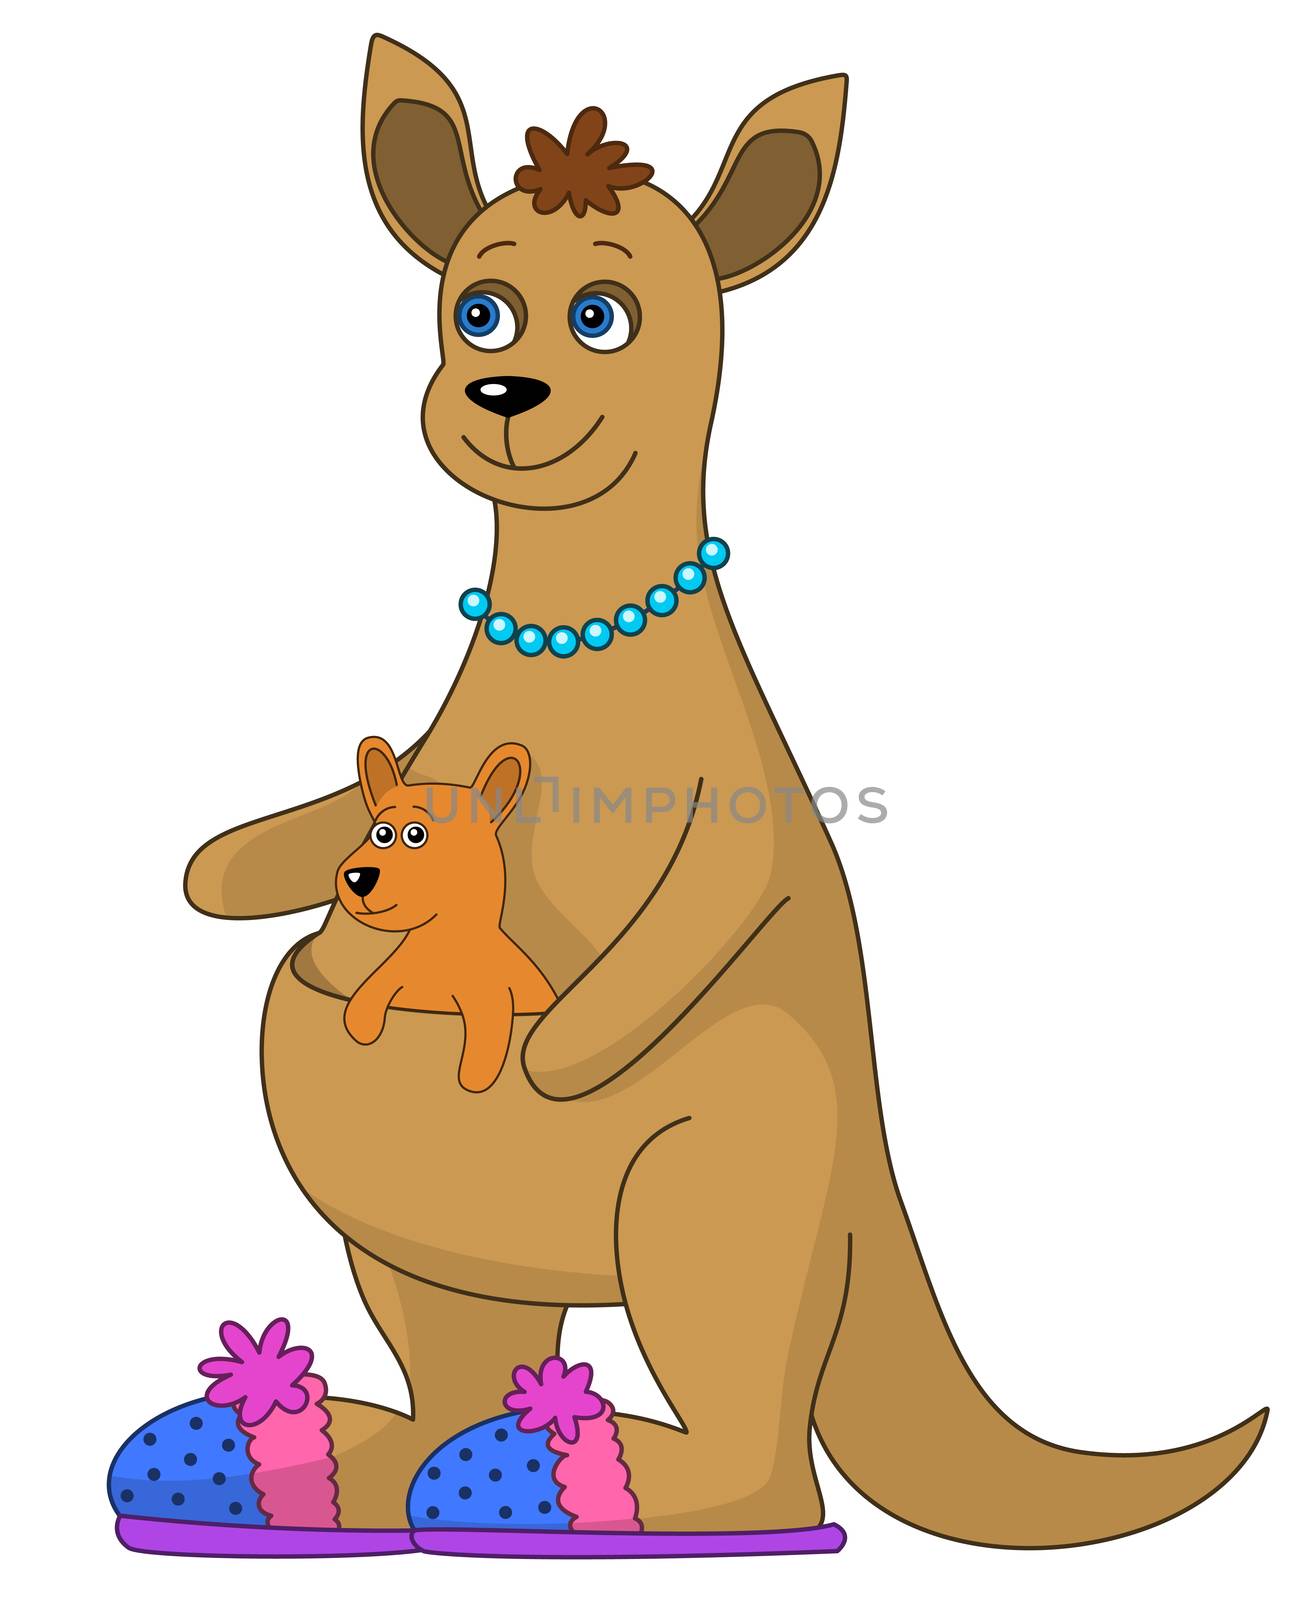 Kangaroo in slippers and baby by alexcoolok